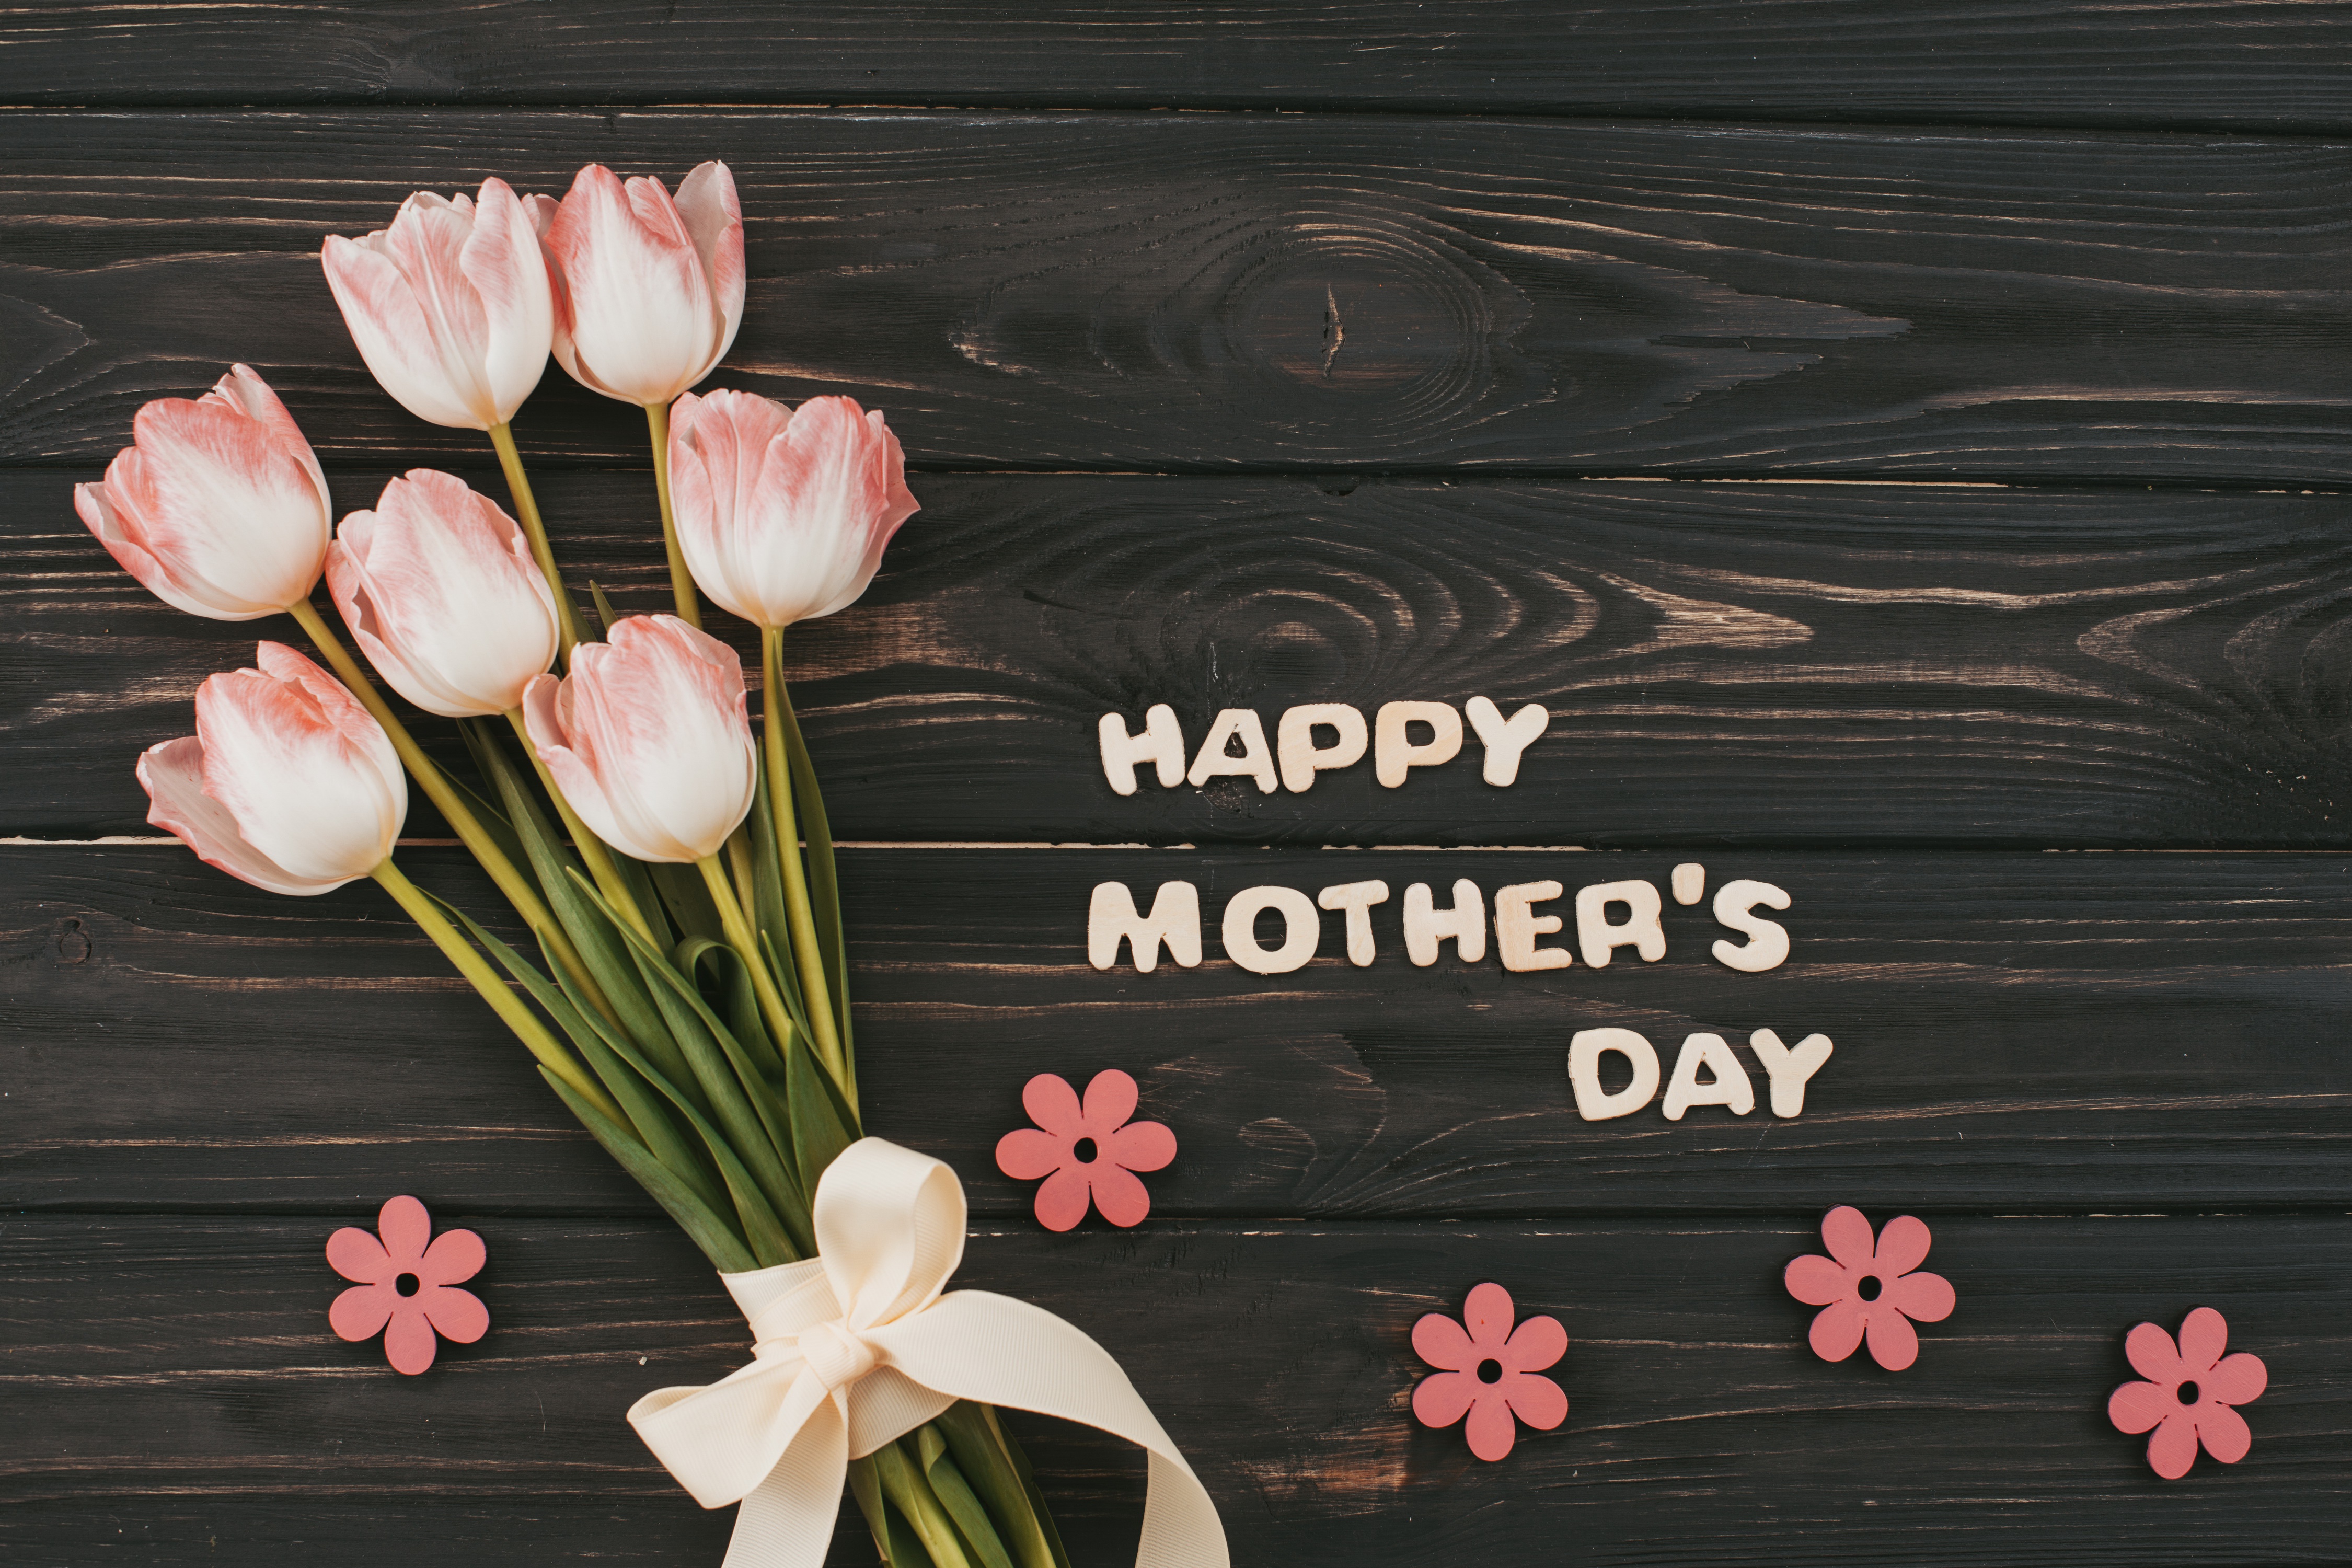 Mothers Day Wallpaper 2023 Best Happy Mothers Day images Photo 2023